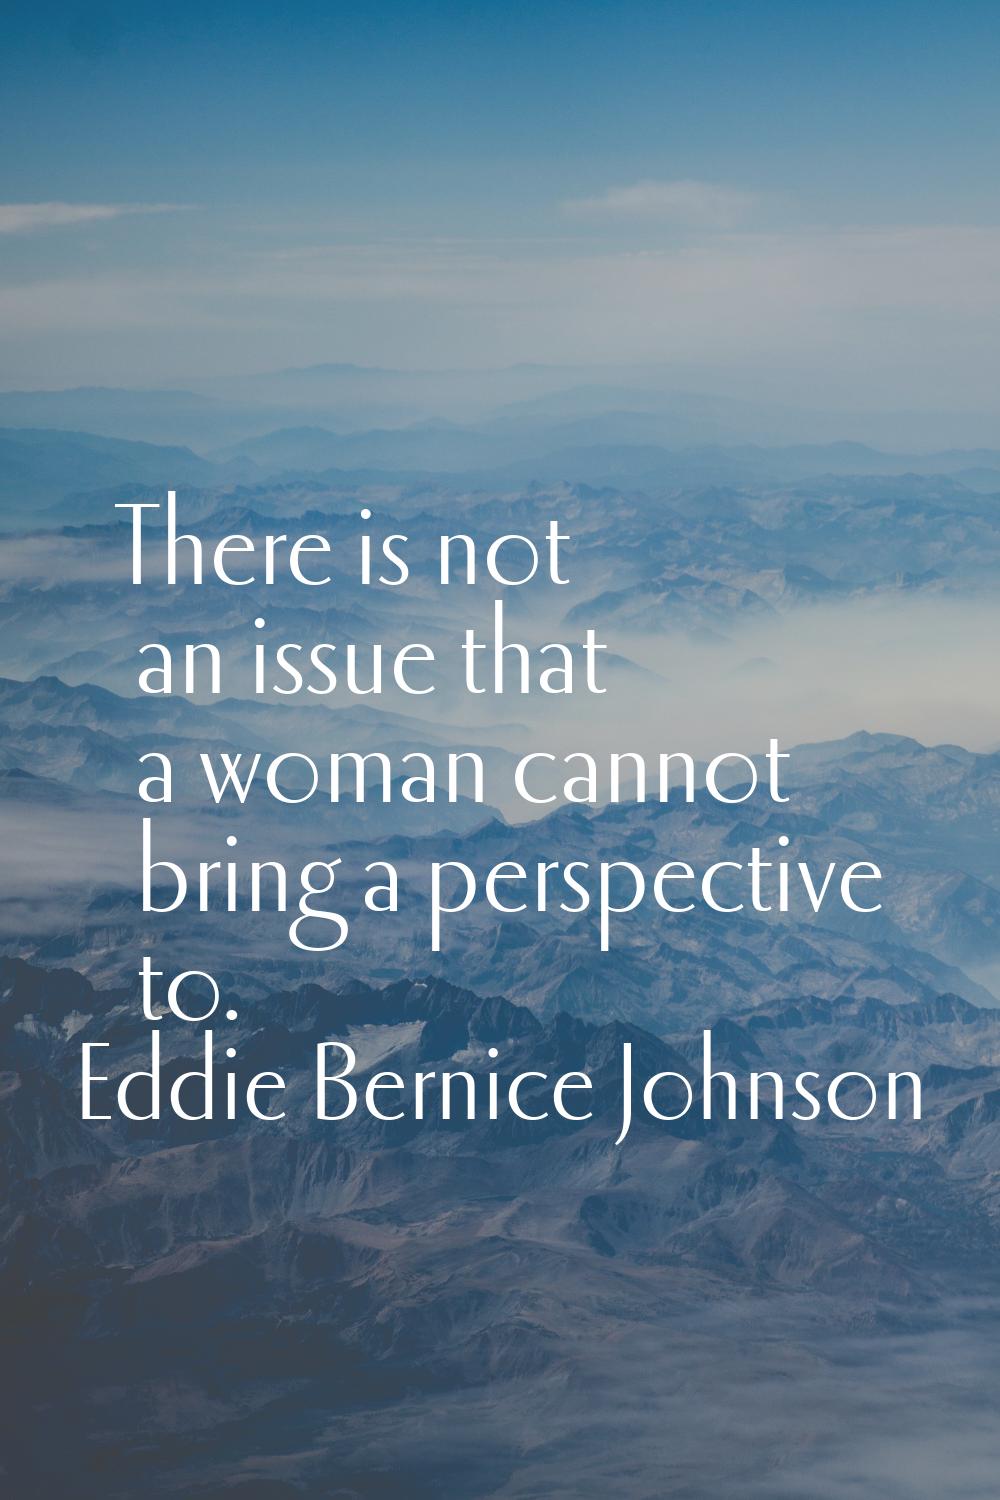 There is not an issue that a woman cannot bring a perspective to.